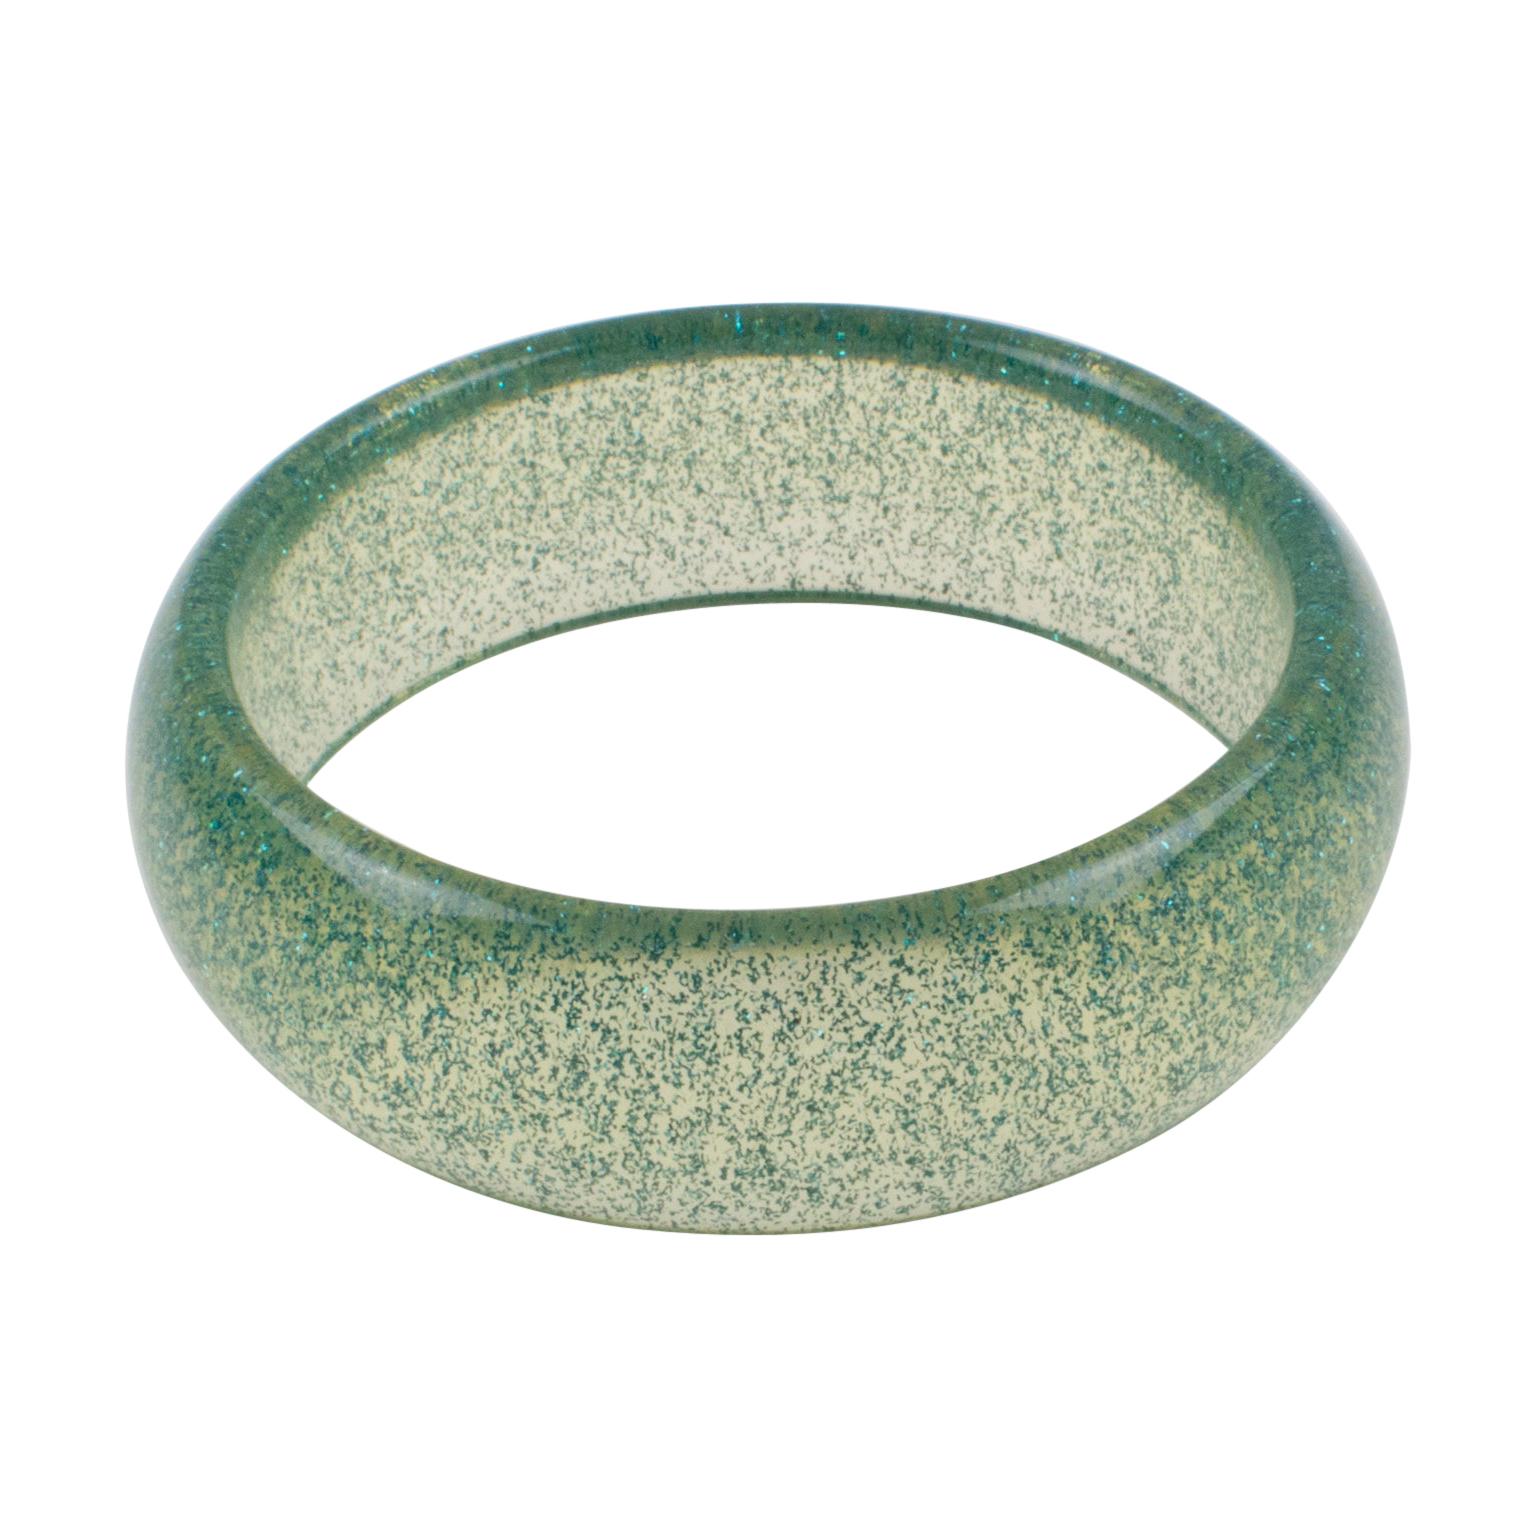 Charming Lucite bracelet bangle. The bangle has a domed shape and is made of clear Lucite and an injection of metallic confetti inclusions in turquoise color. The metallic confetti glitter is like those of Christmas decorations. There is no visible